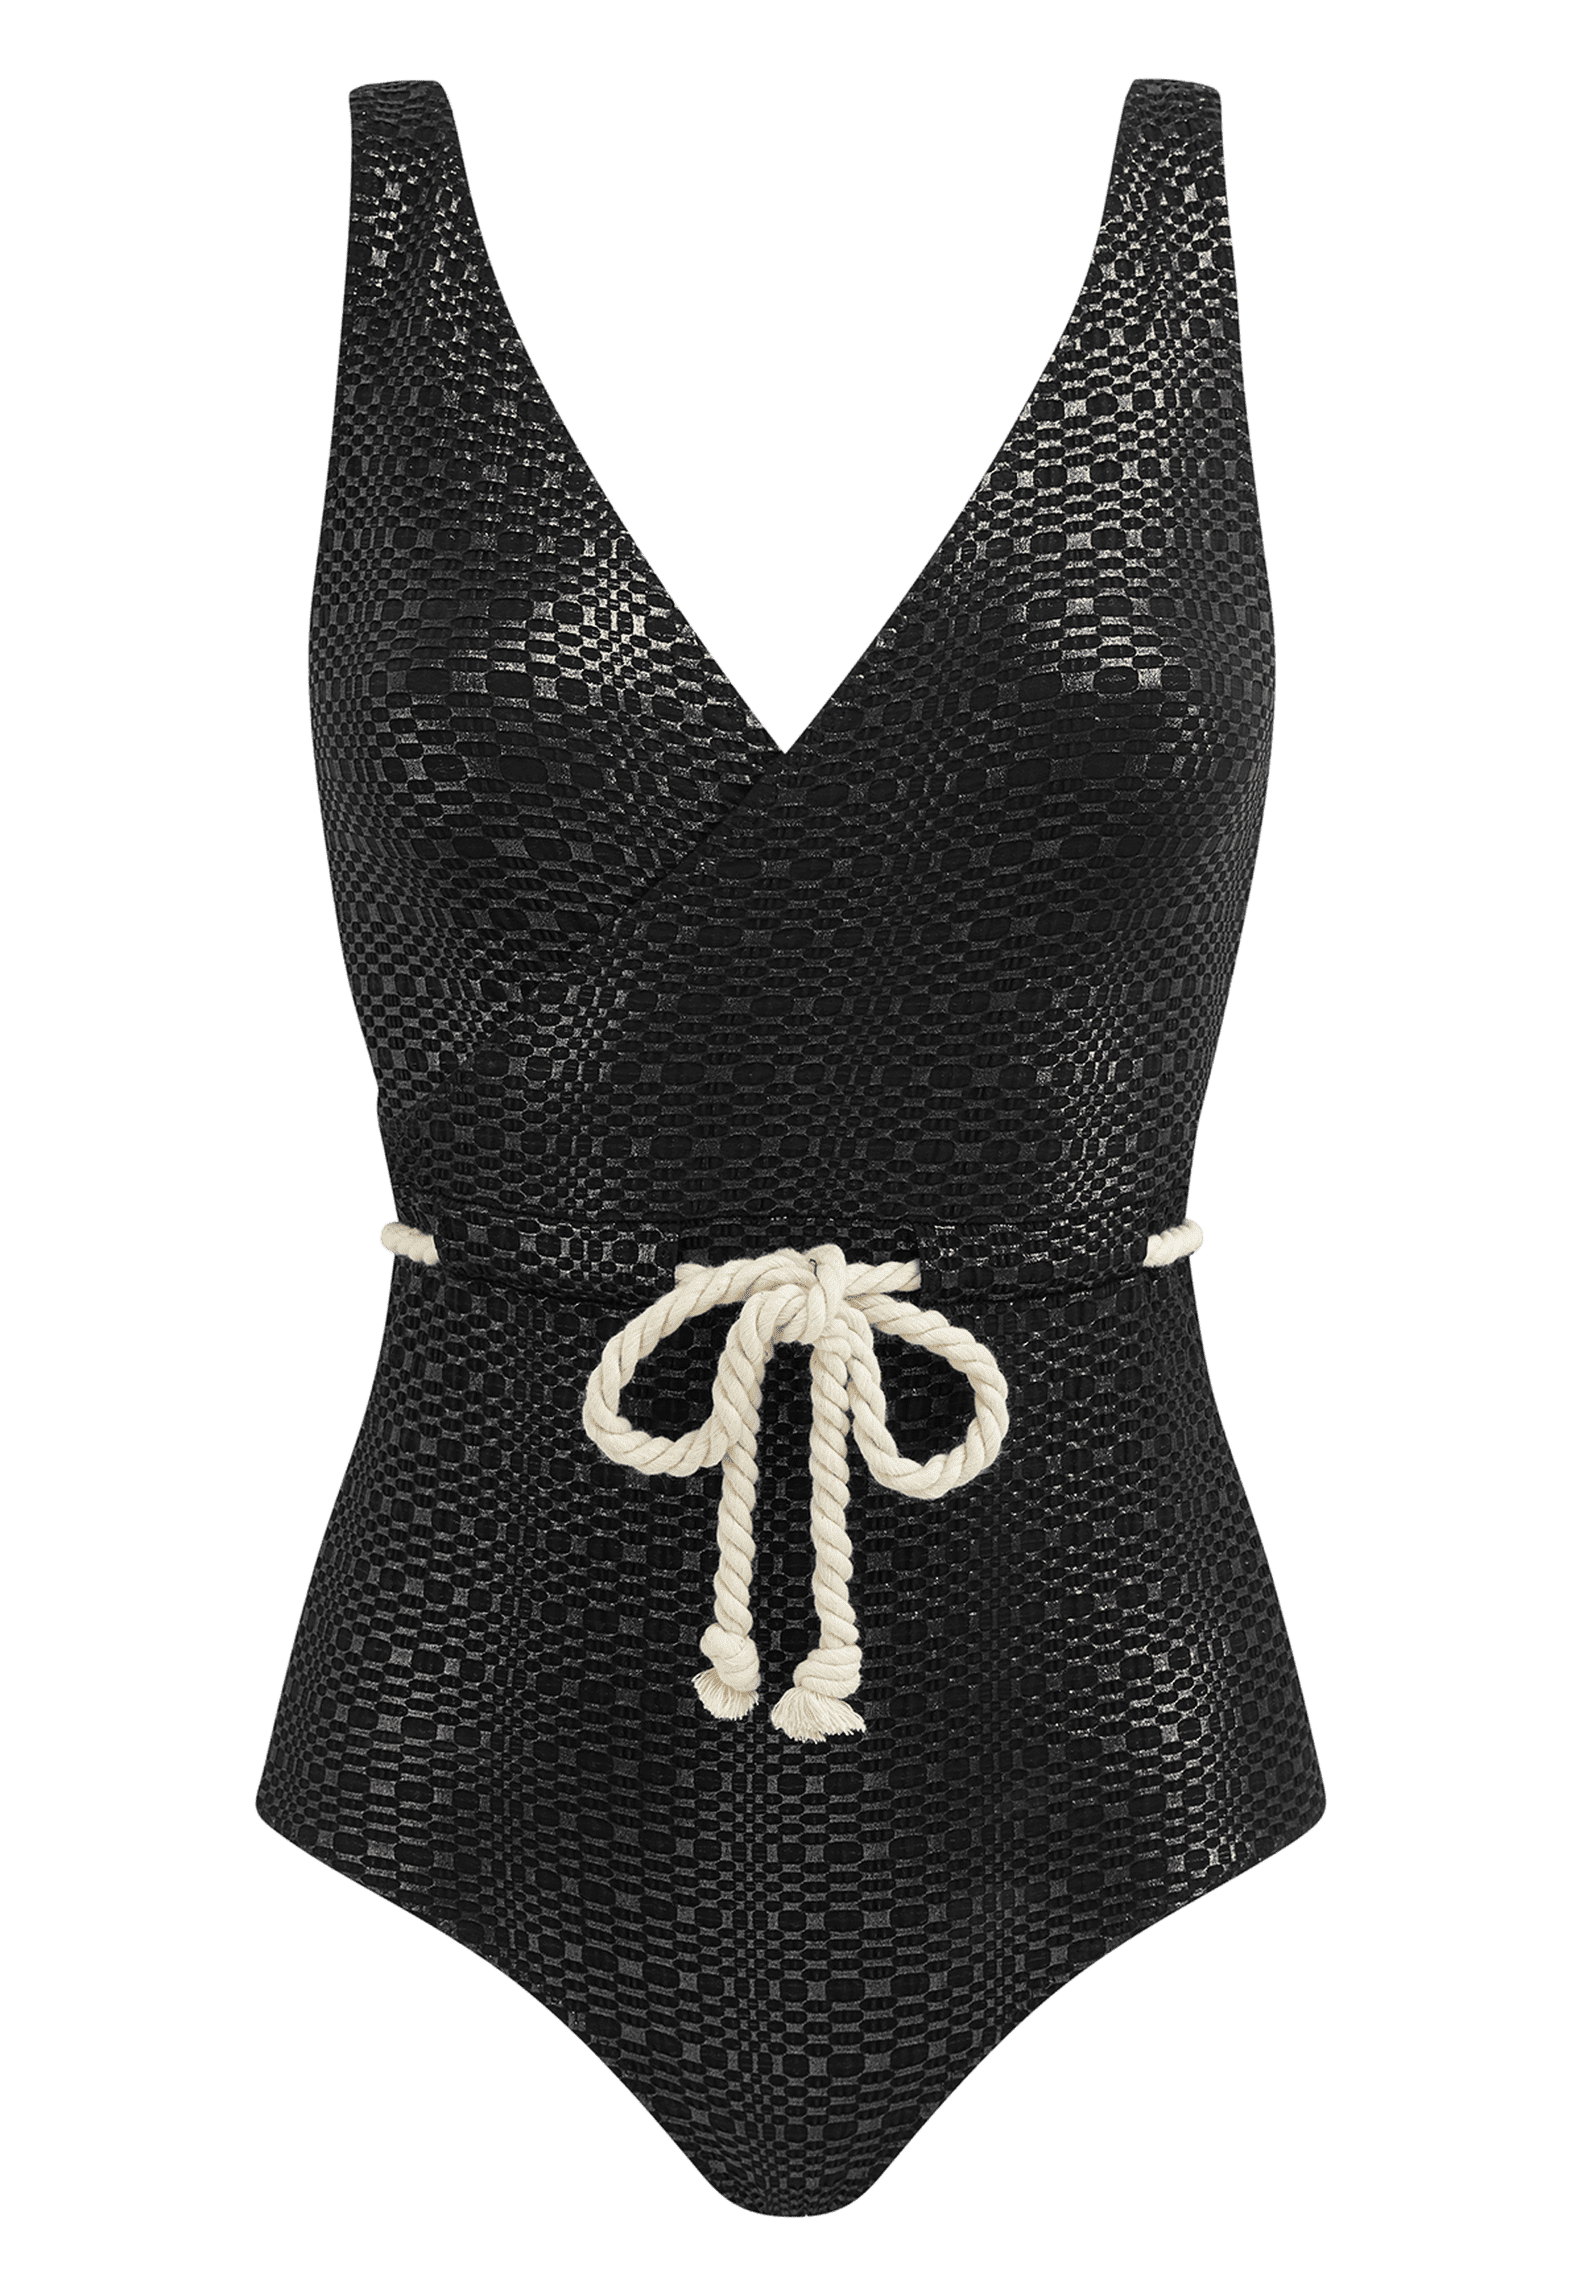 Ciara's Black One-Piece Swimsuit With Rope Belt March 2019 | POPSUGAR ...